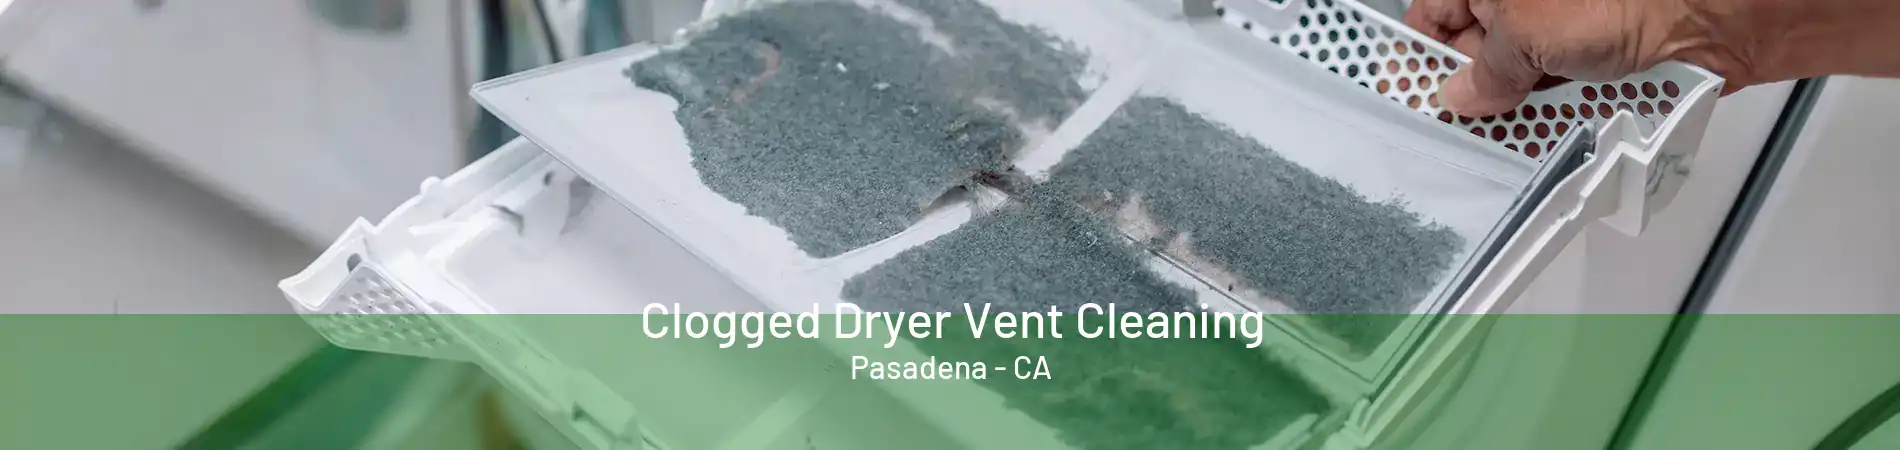 Clogged Dryer Vent Cleaning Pasadena - CA